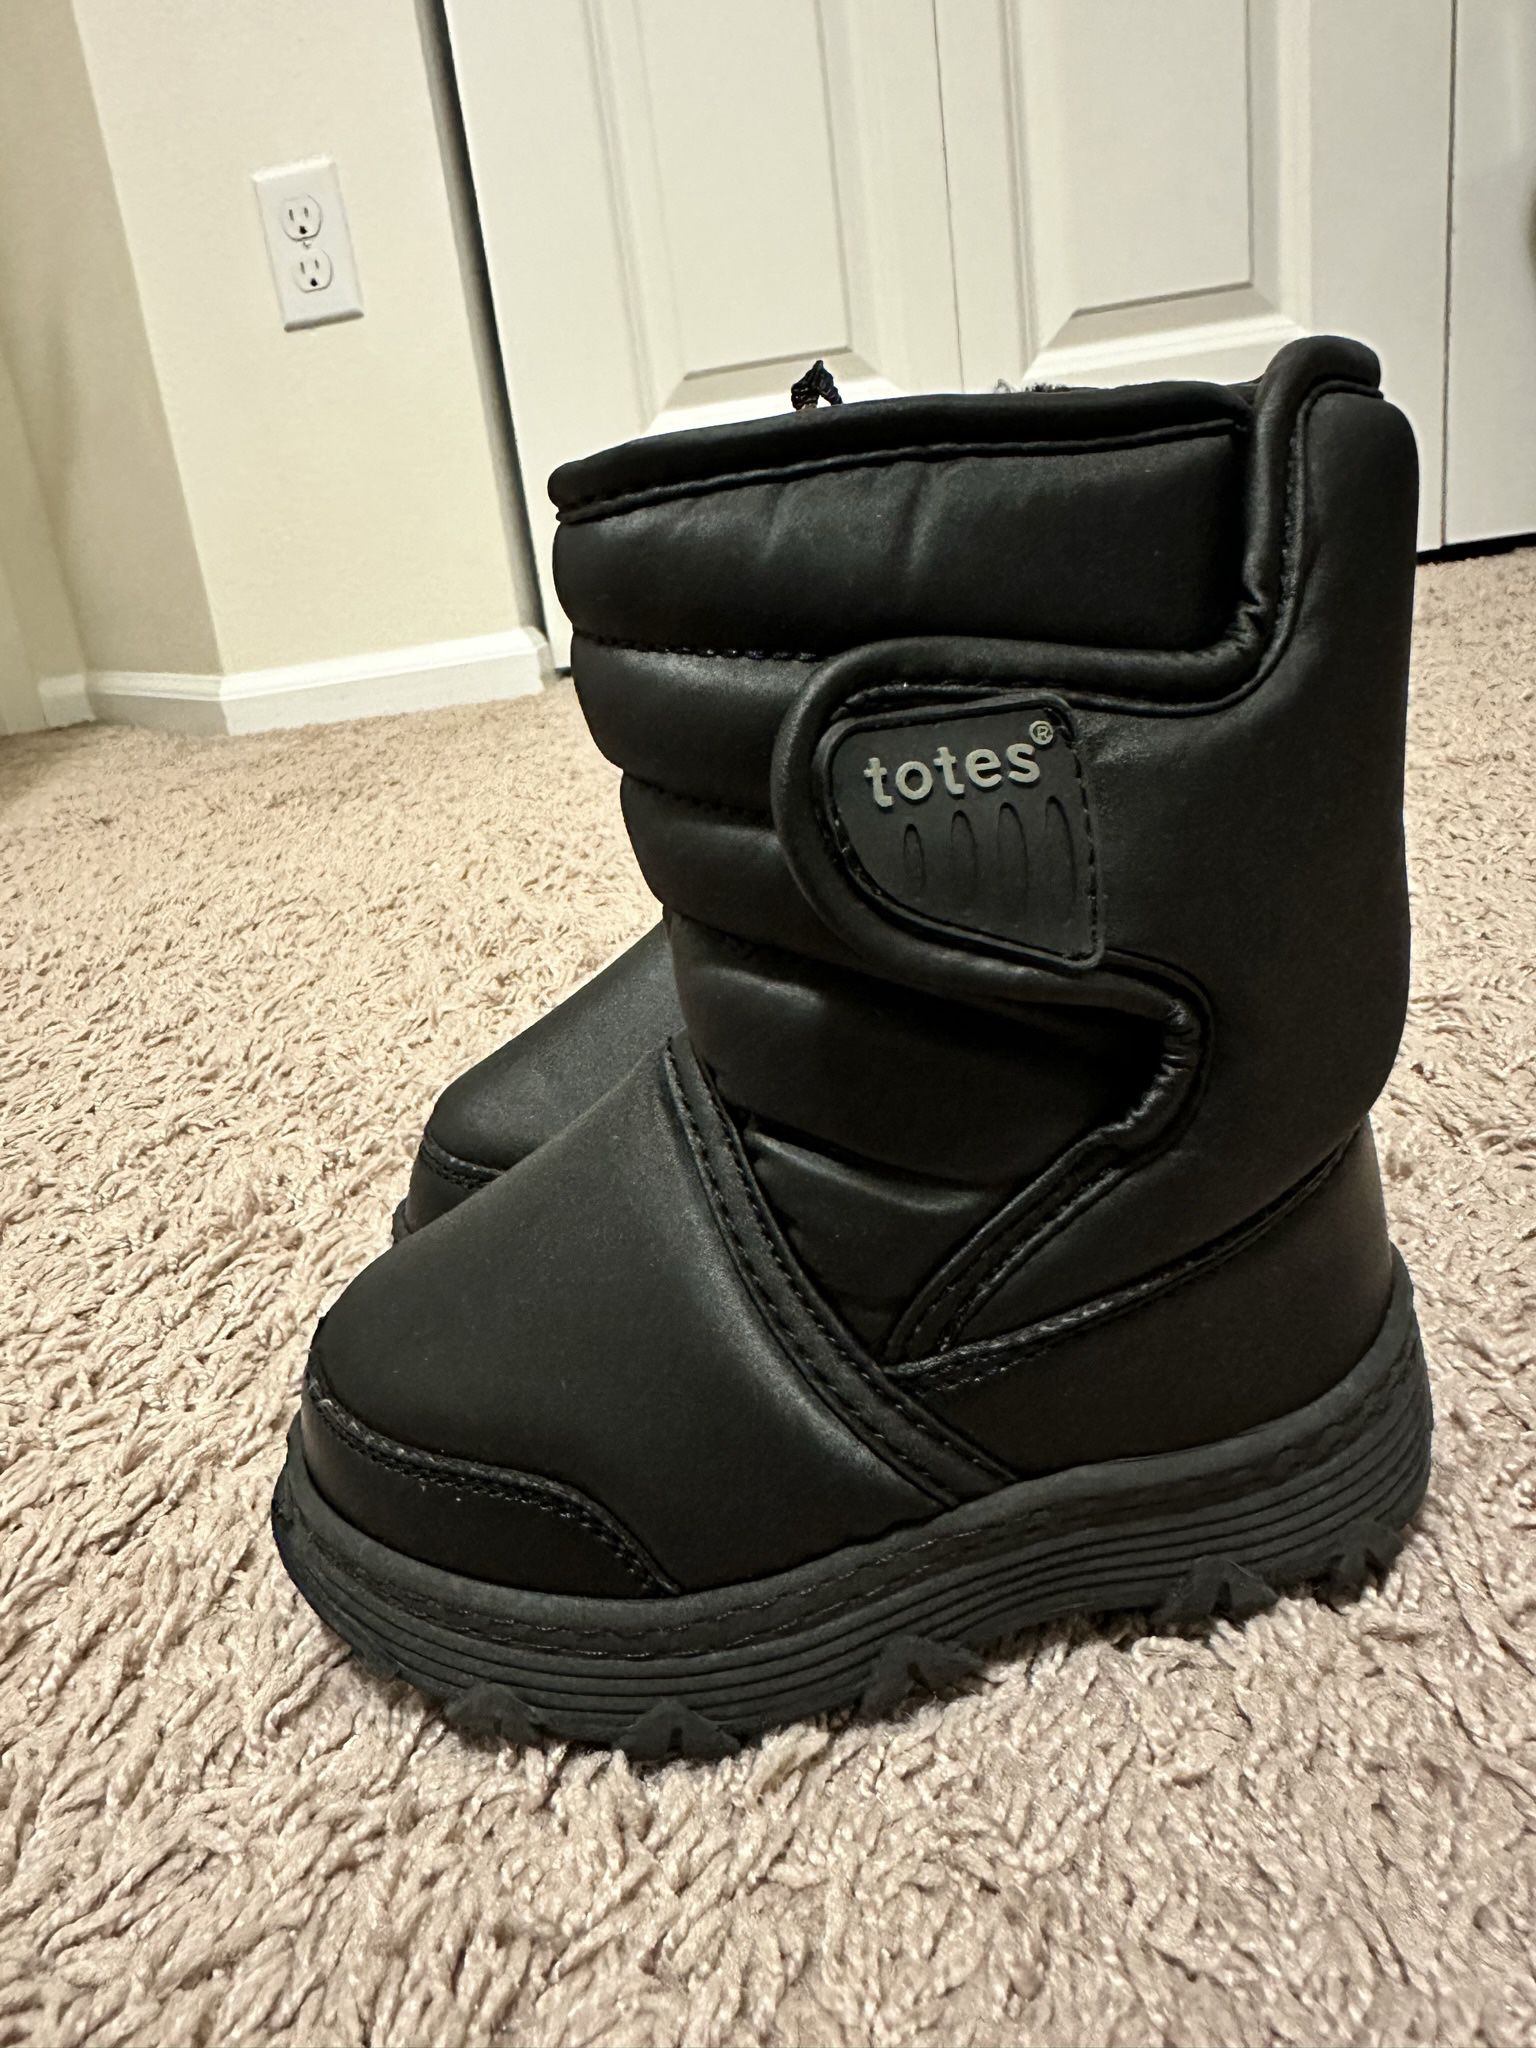 New!! Baby/Toddler Black Snow Boots Size 7c